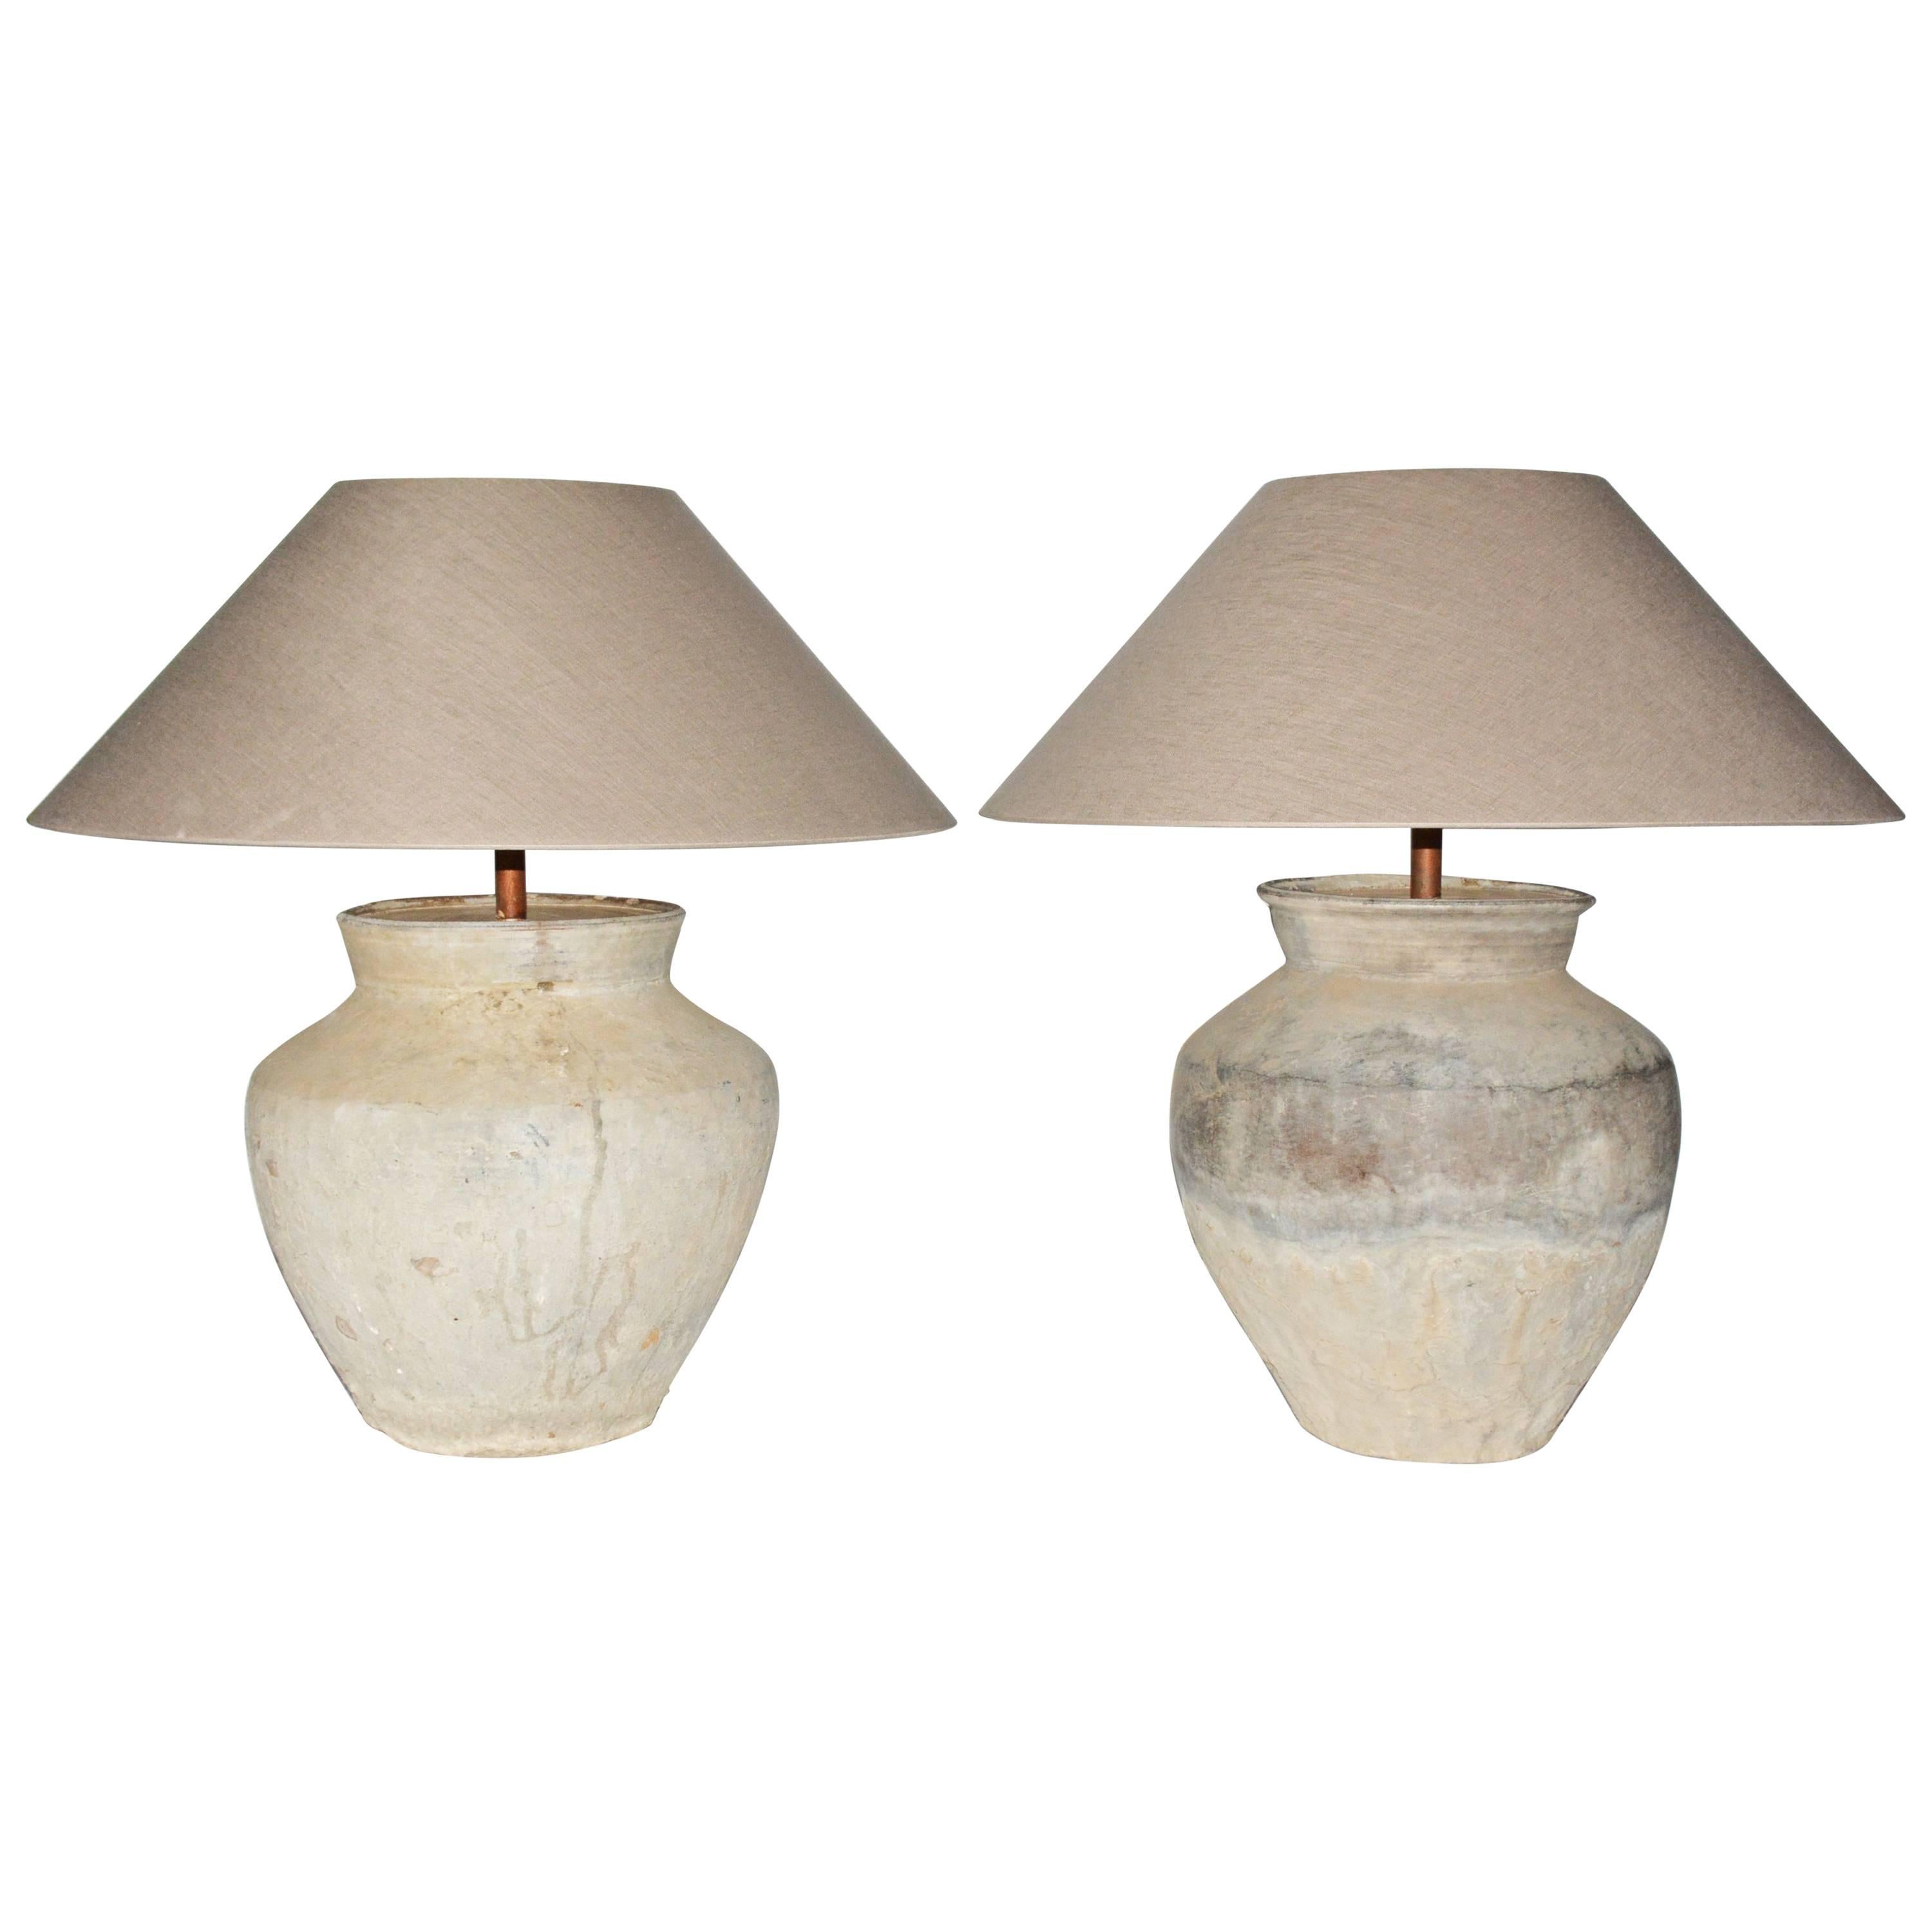 Large Antique Jar Lamps with Shades, Pair